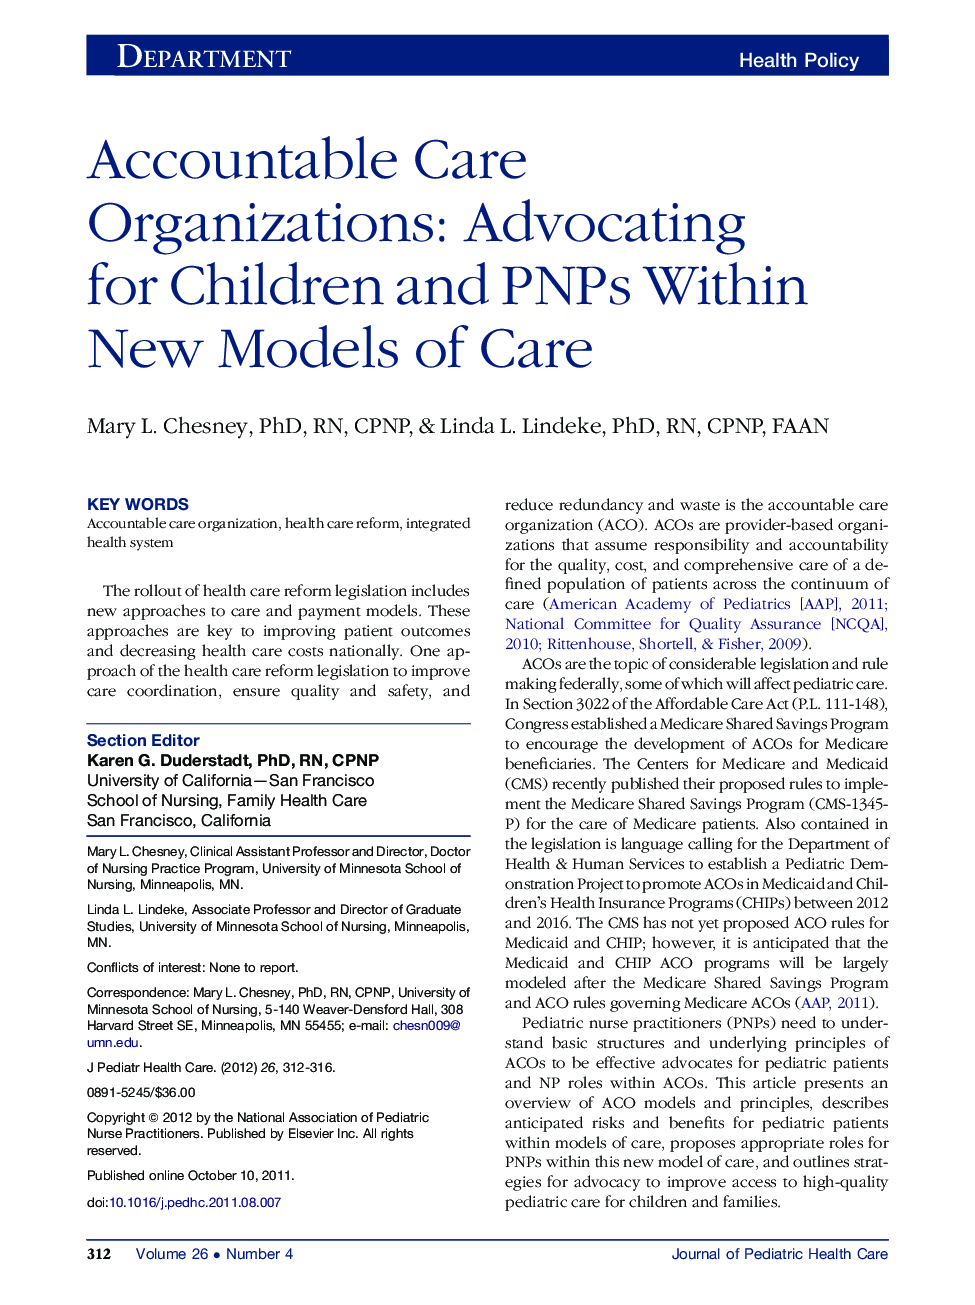 Accountable Care Organizations: Advocating for Children and PNPs Within New Models of Care